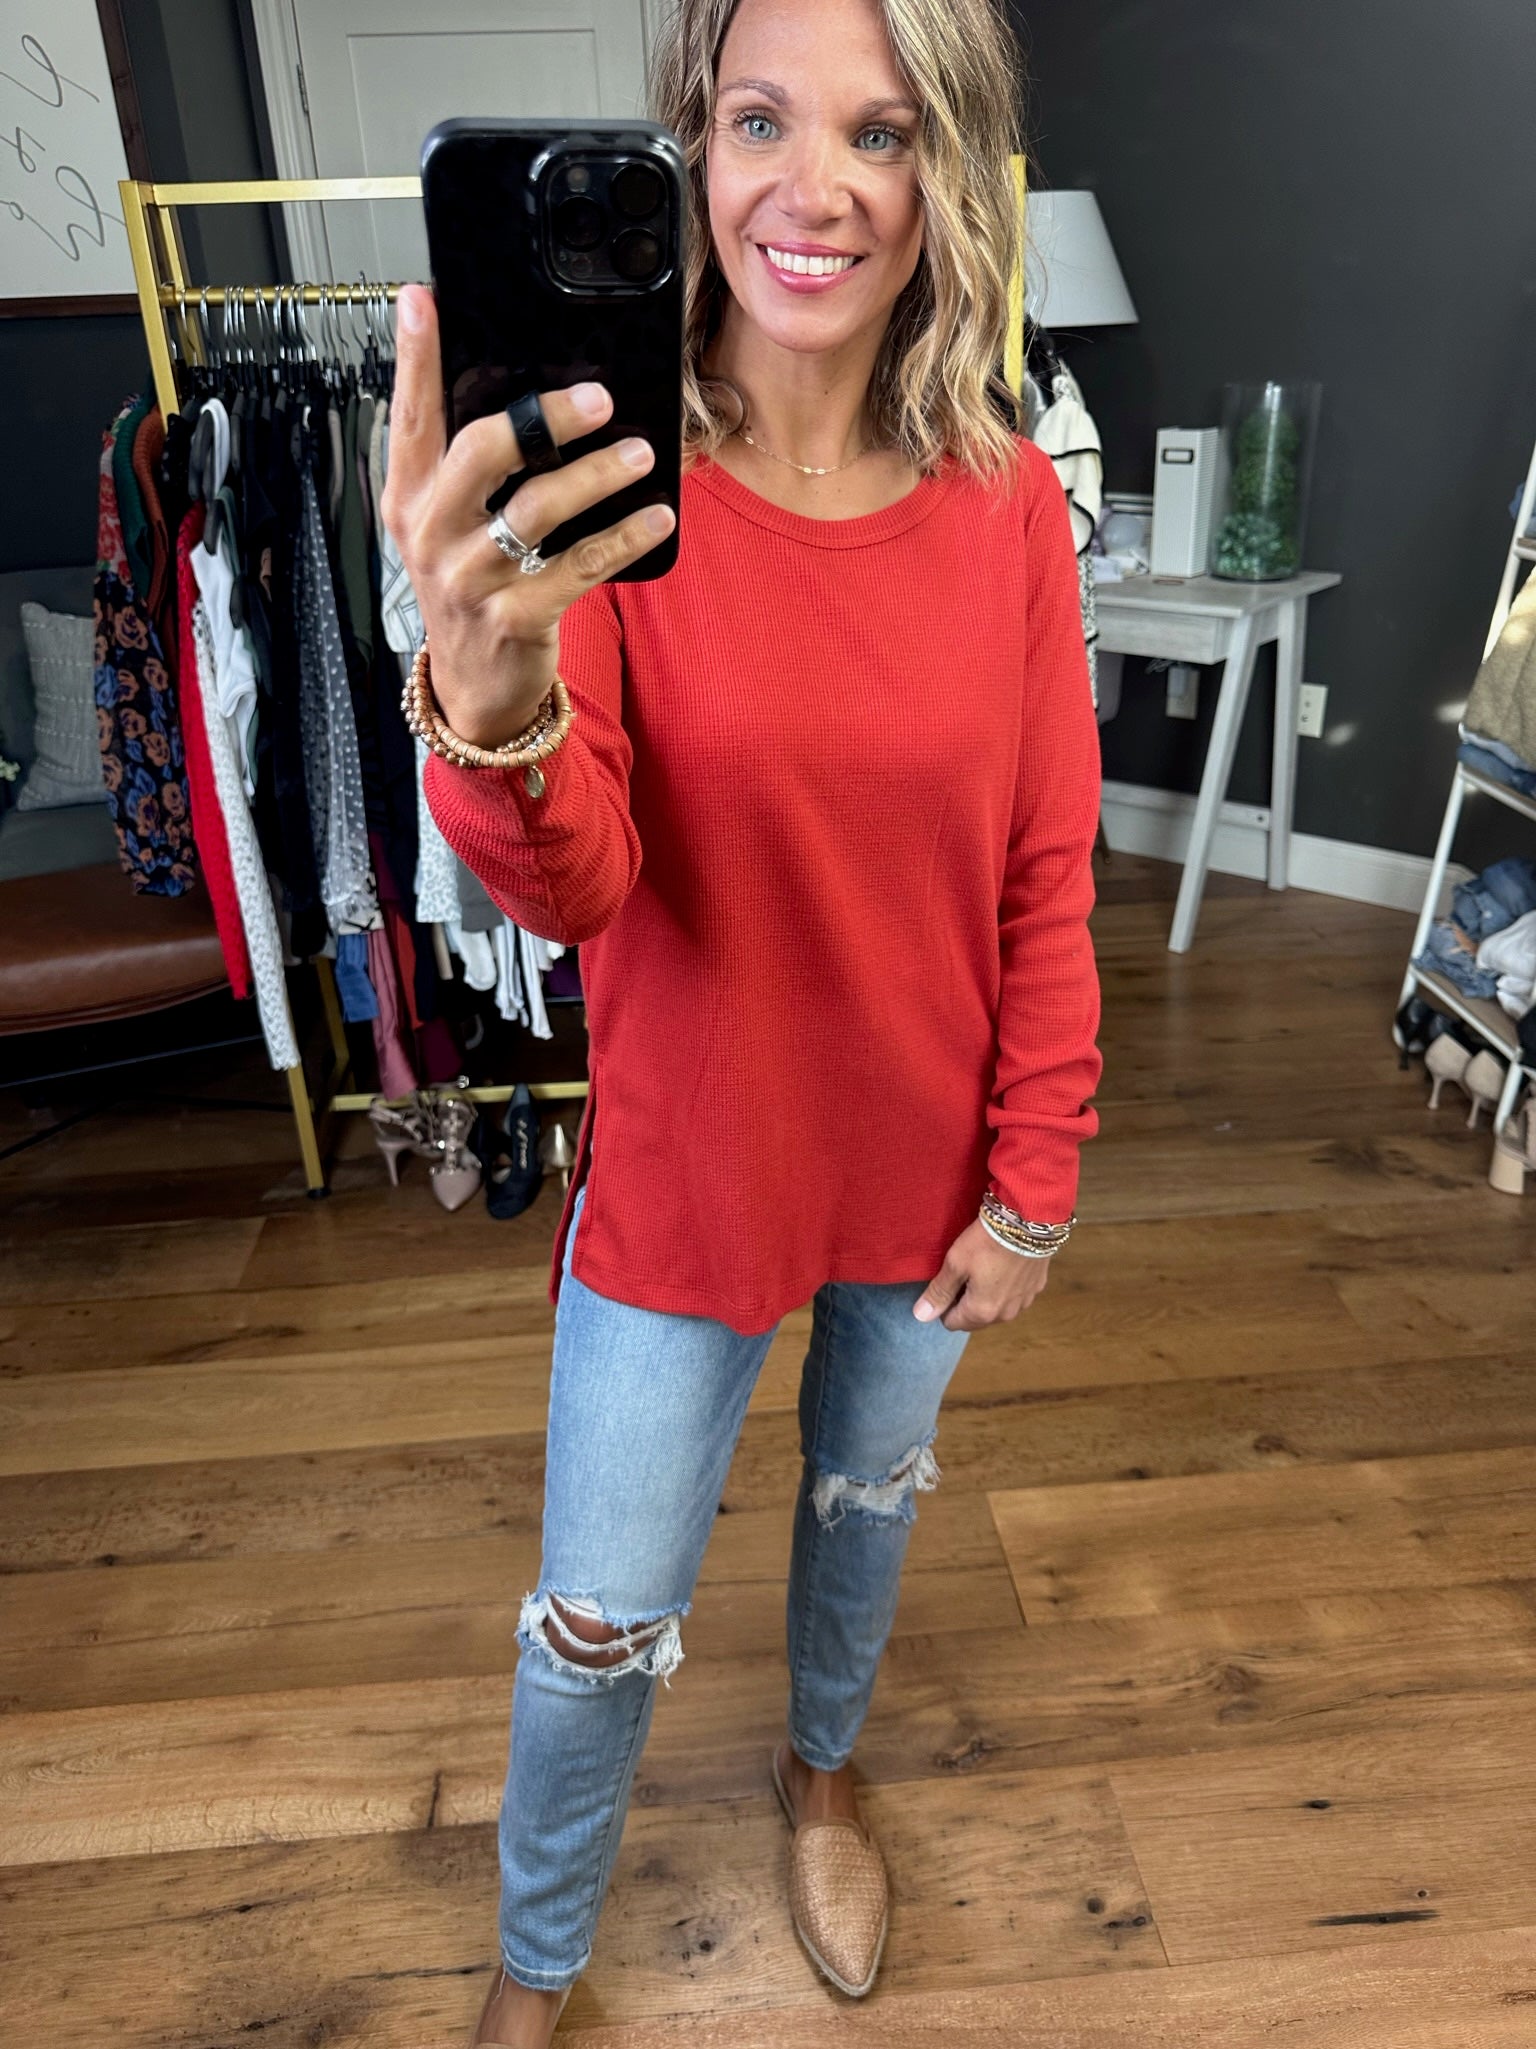 In Good Time Textured Longsleeve Top With Side-Slit Detail - Mutliple Options